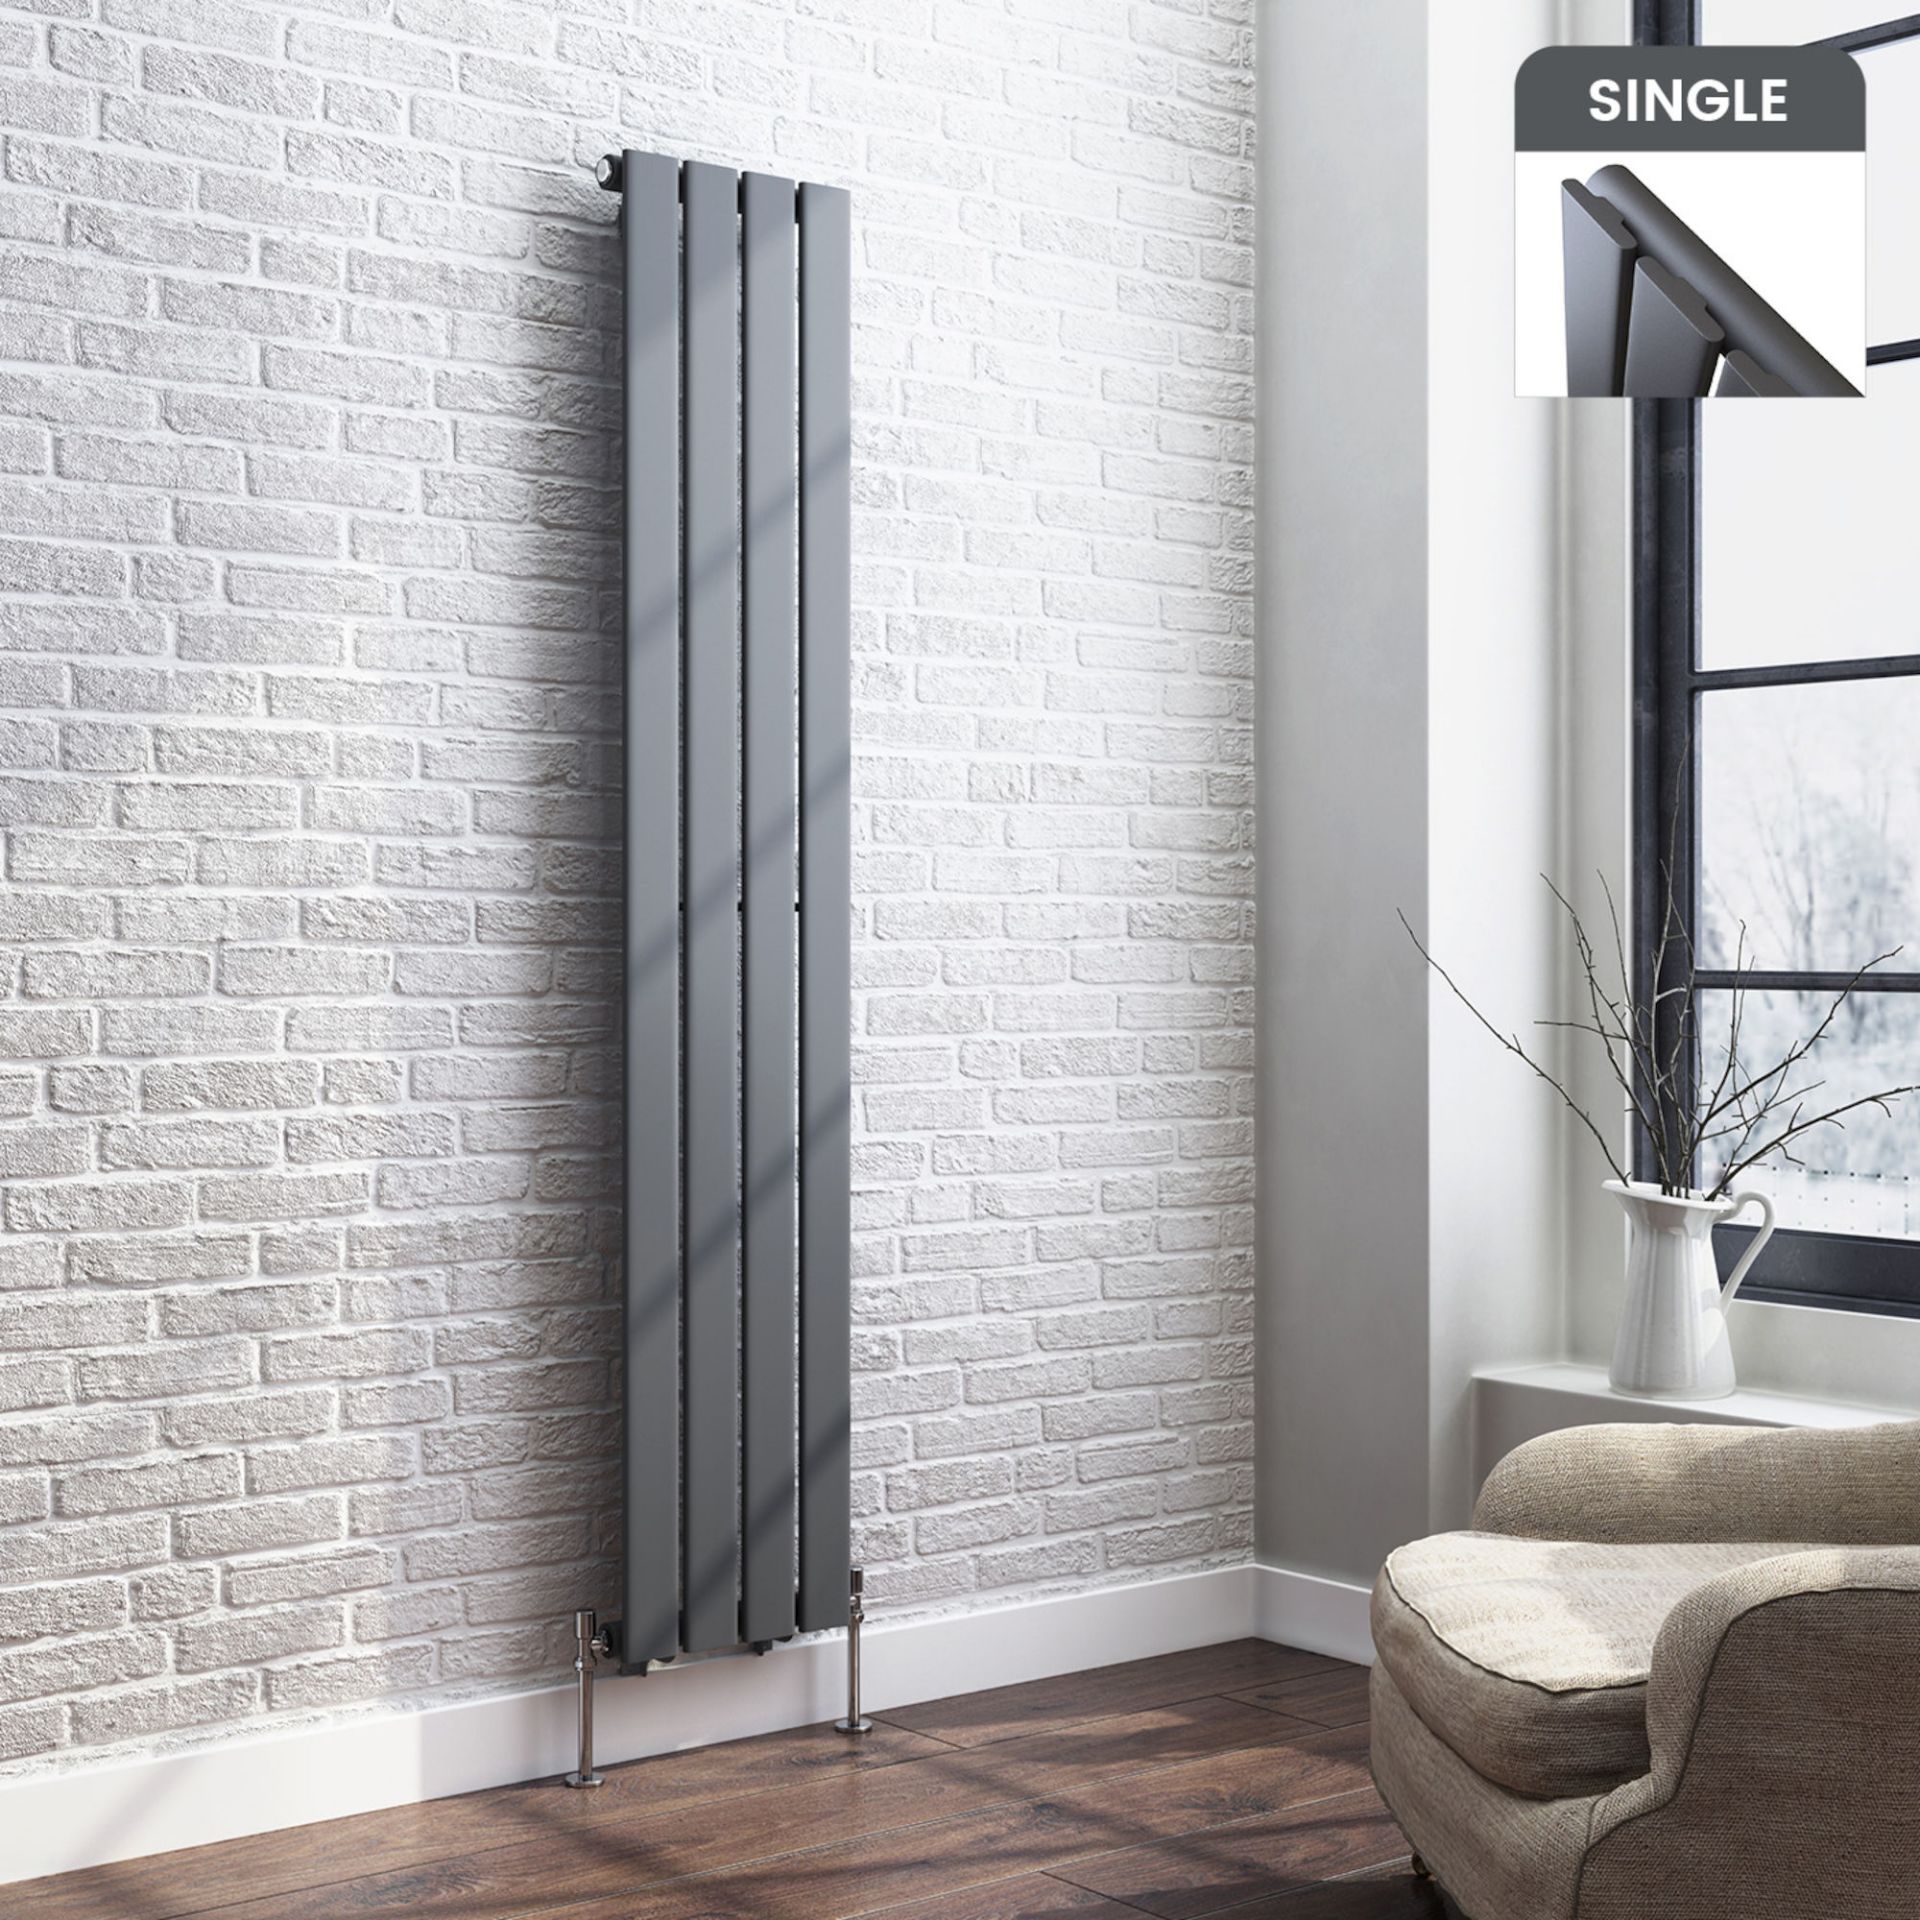 (TP96) 1600x300mm Anthracite Single Flat Panel Vertical Radiator. RRP £234.99. Made from low